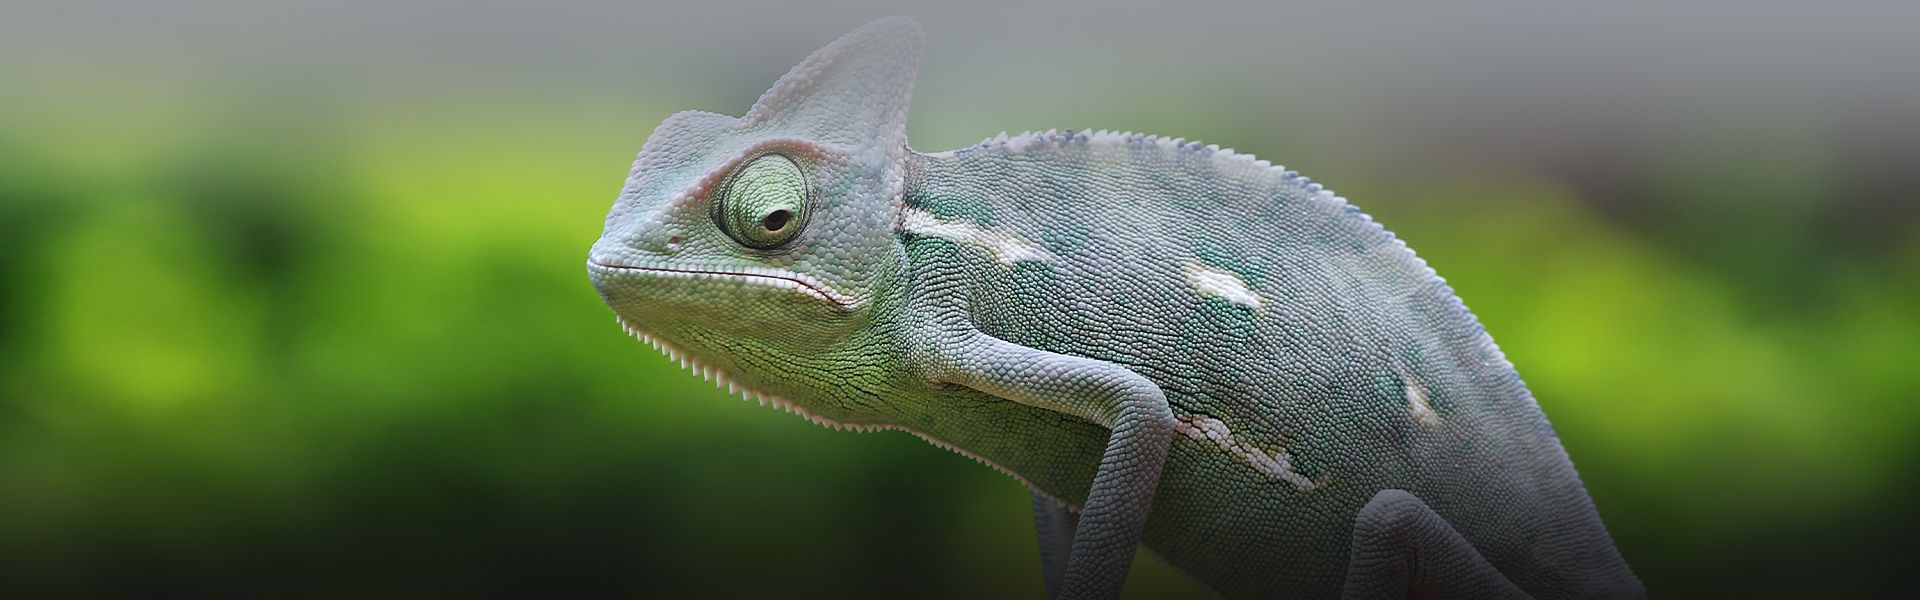 chameleon with green background